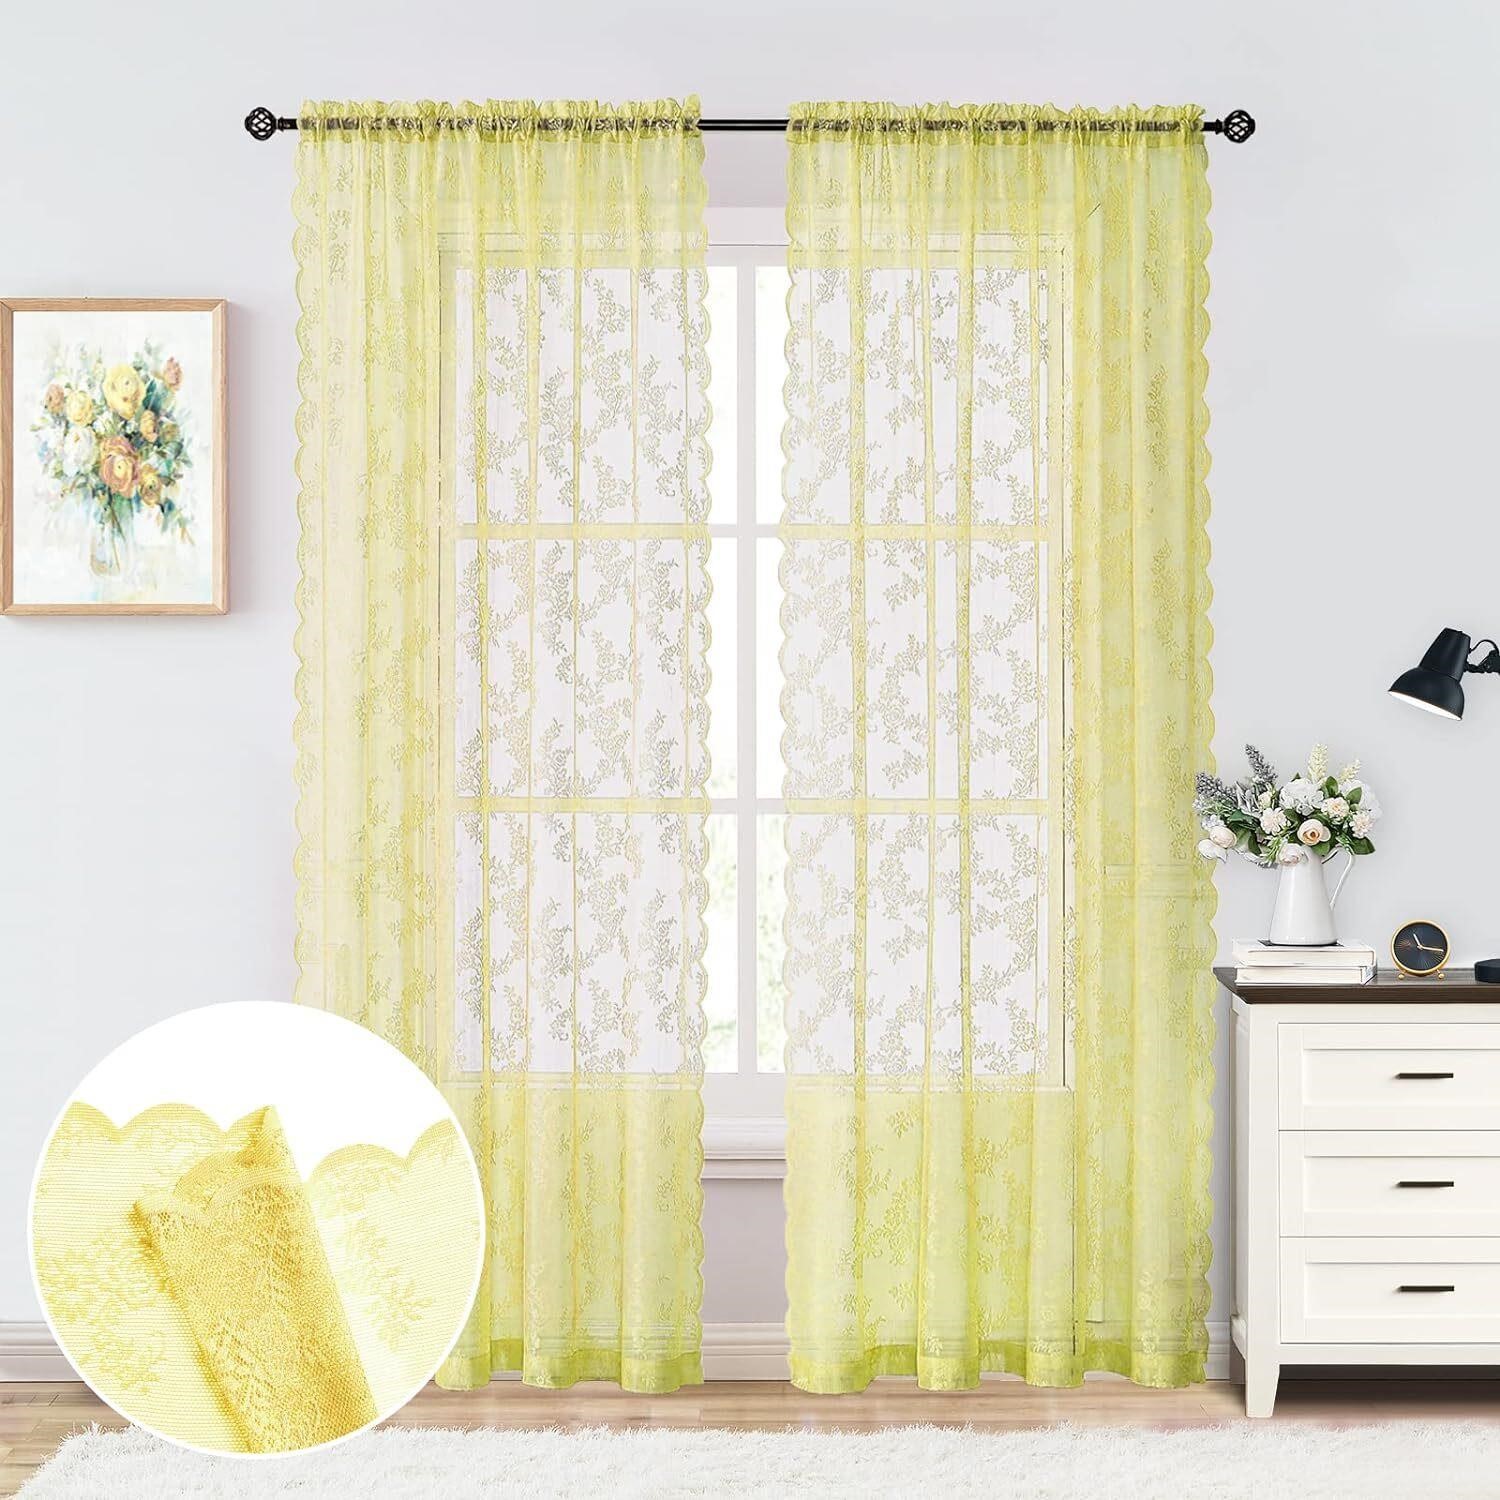 $22  Yellow Sheer Curtains  Floral Lace  55x108